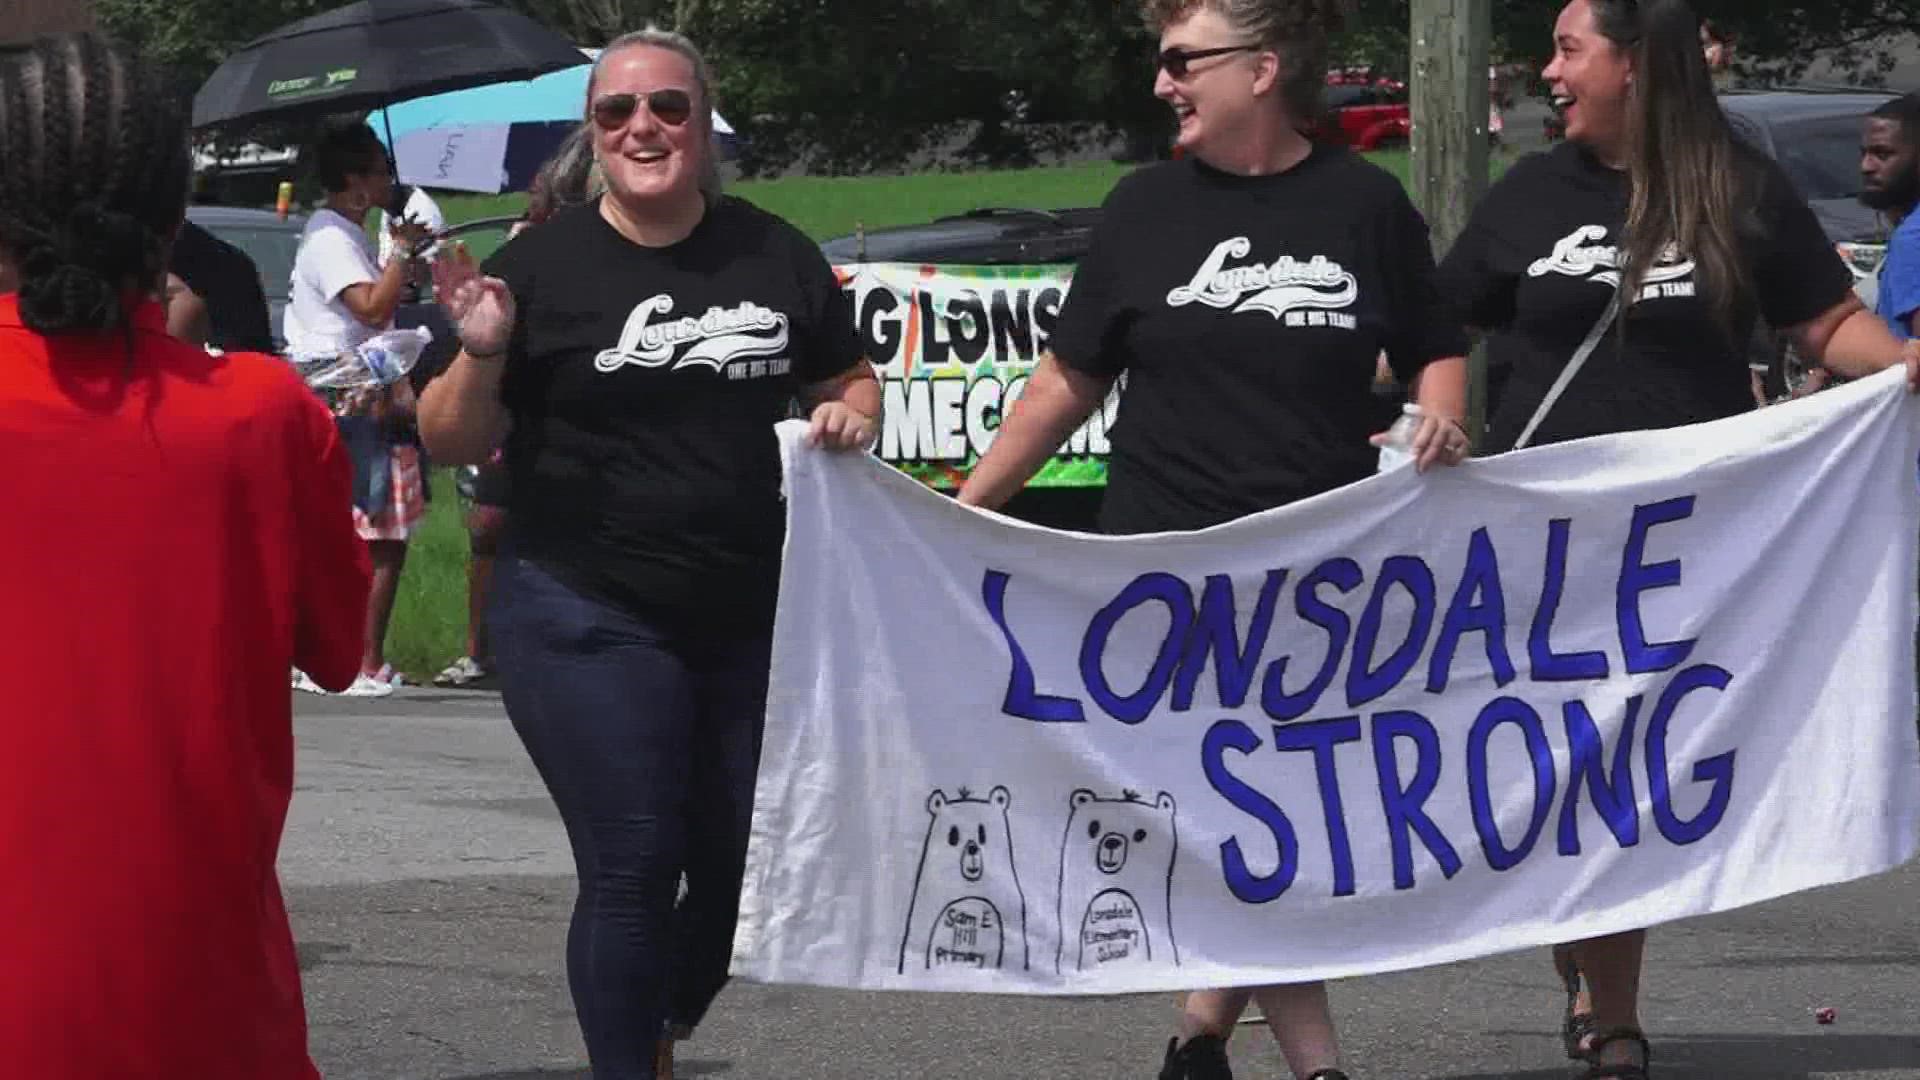 People in the Lonsdale neighborhood are celebrating the community and its rich history with a homecoming for another year.